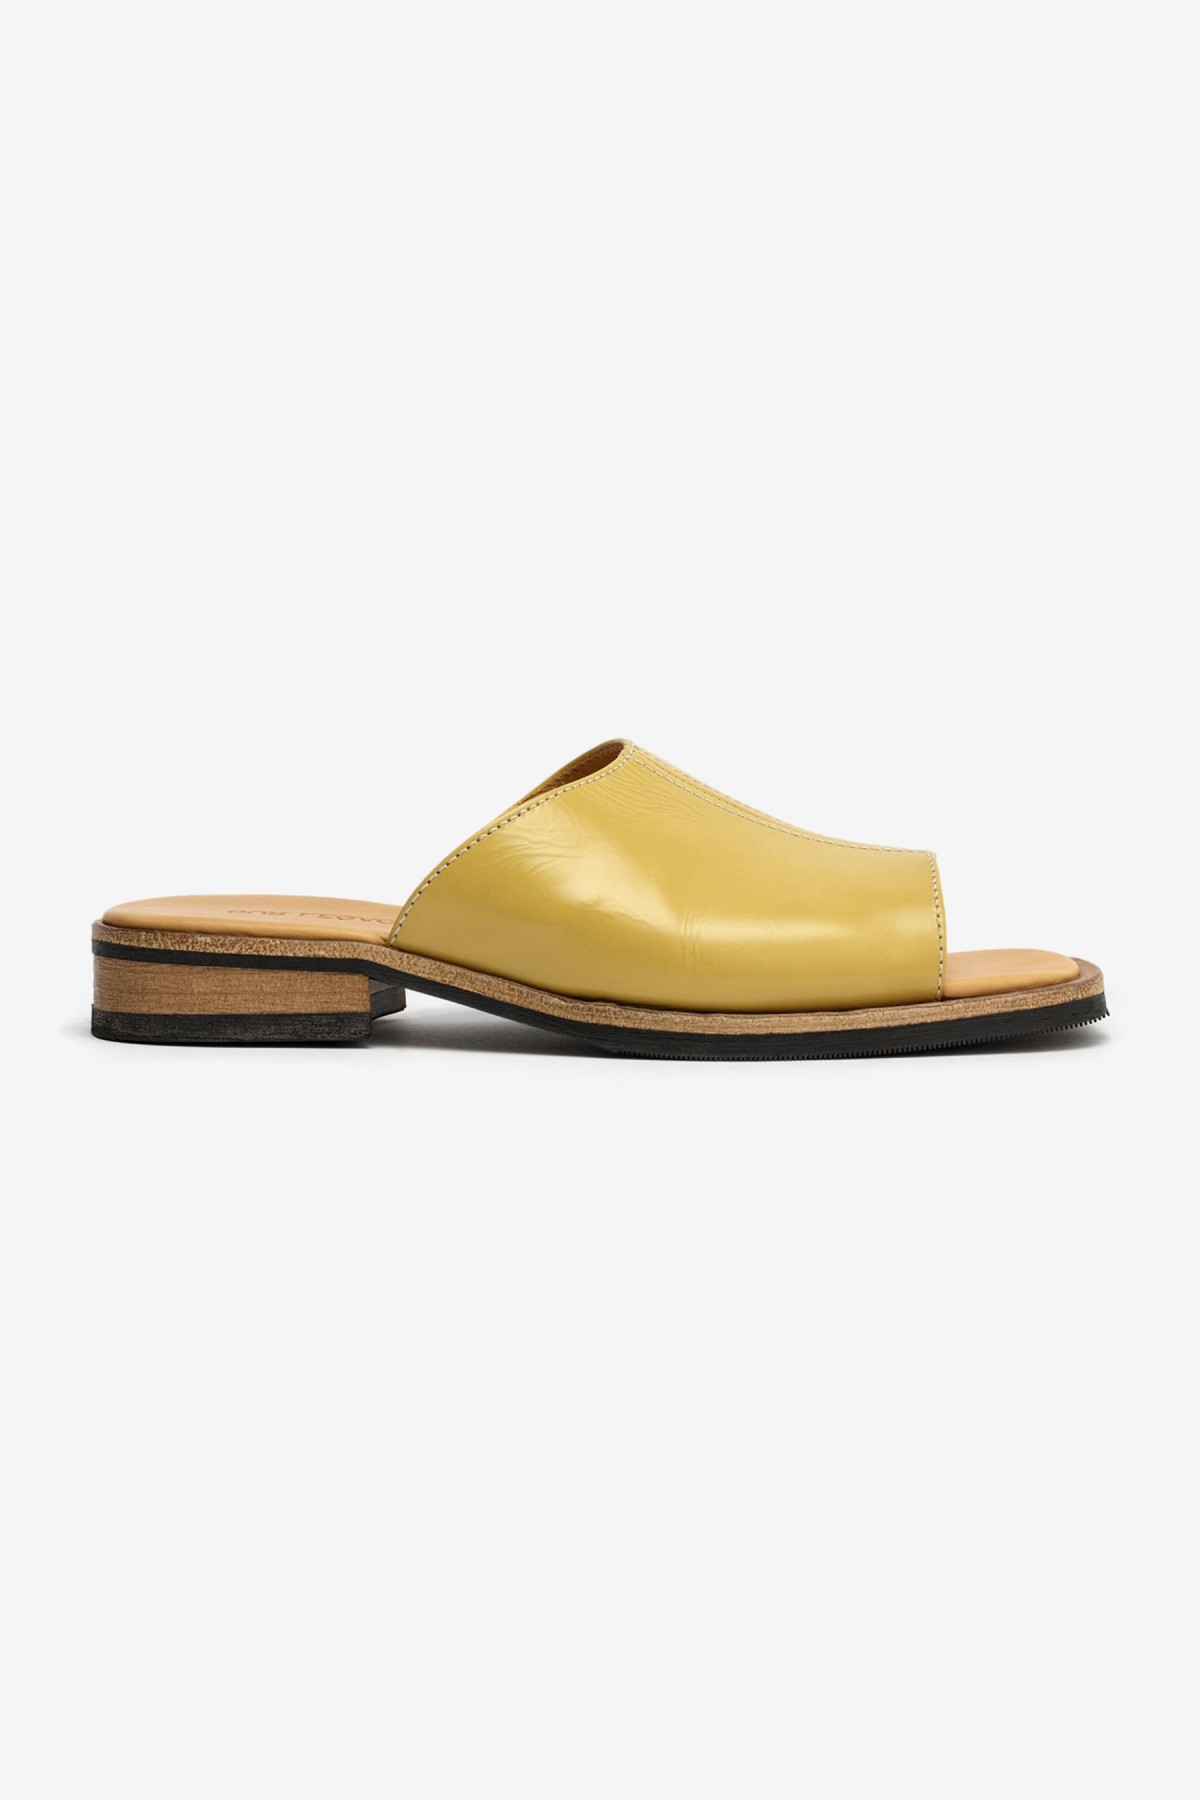 Our Legacy Slide in Tahini Yellow Leather